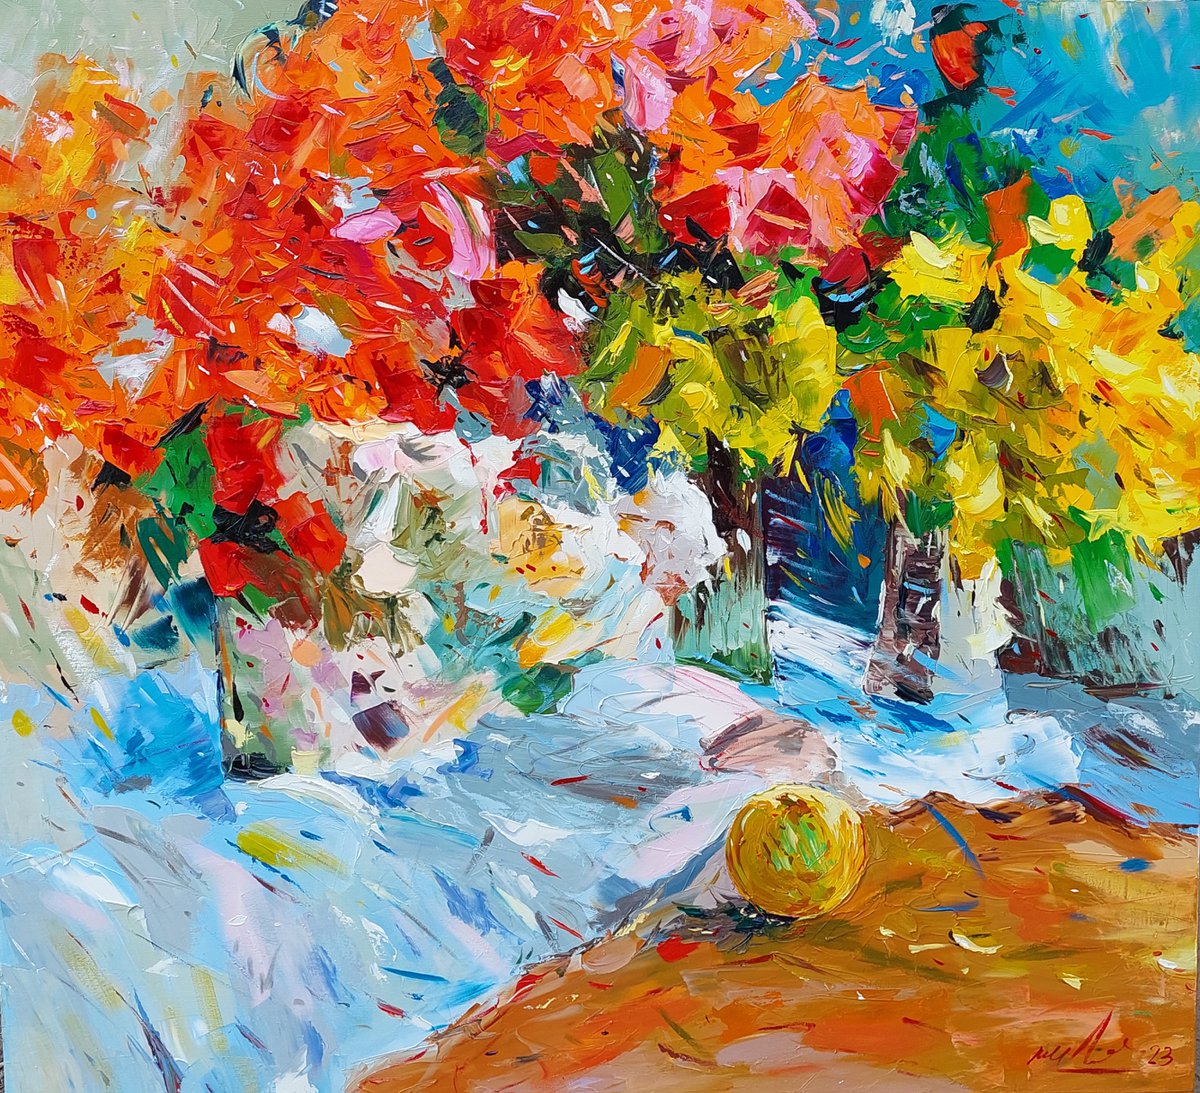 Abstract still life (100x110cm, oil/canvas, palette knife) by Andranik Harutyunyan